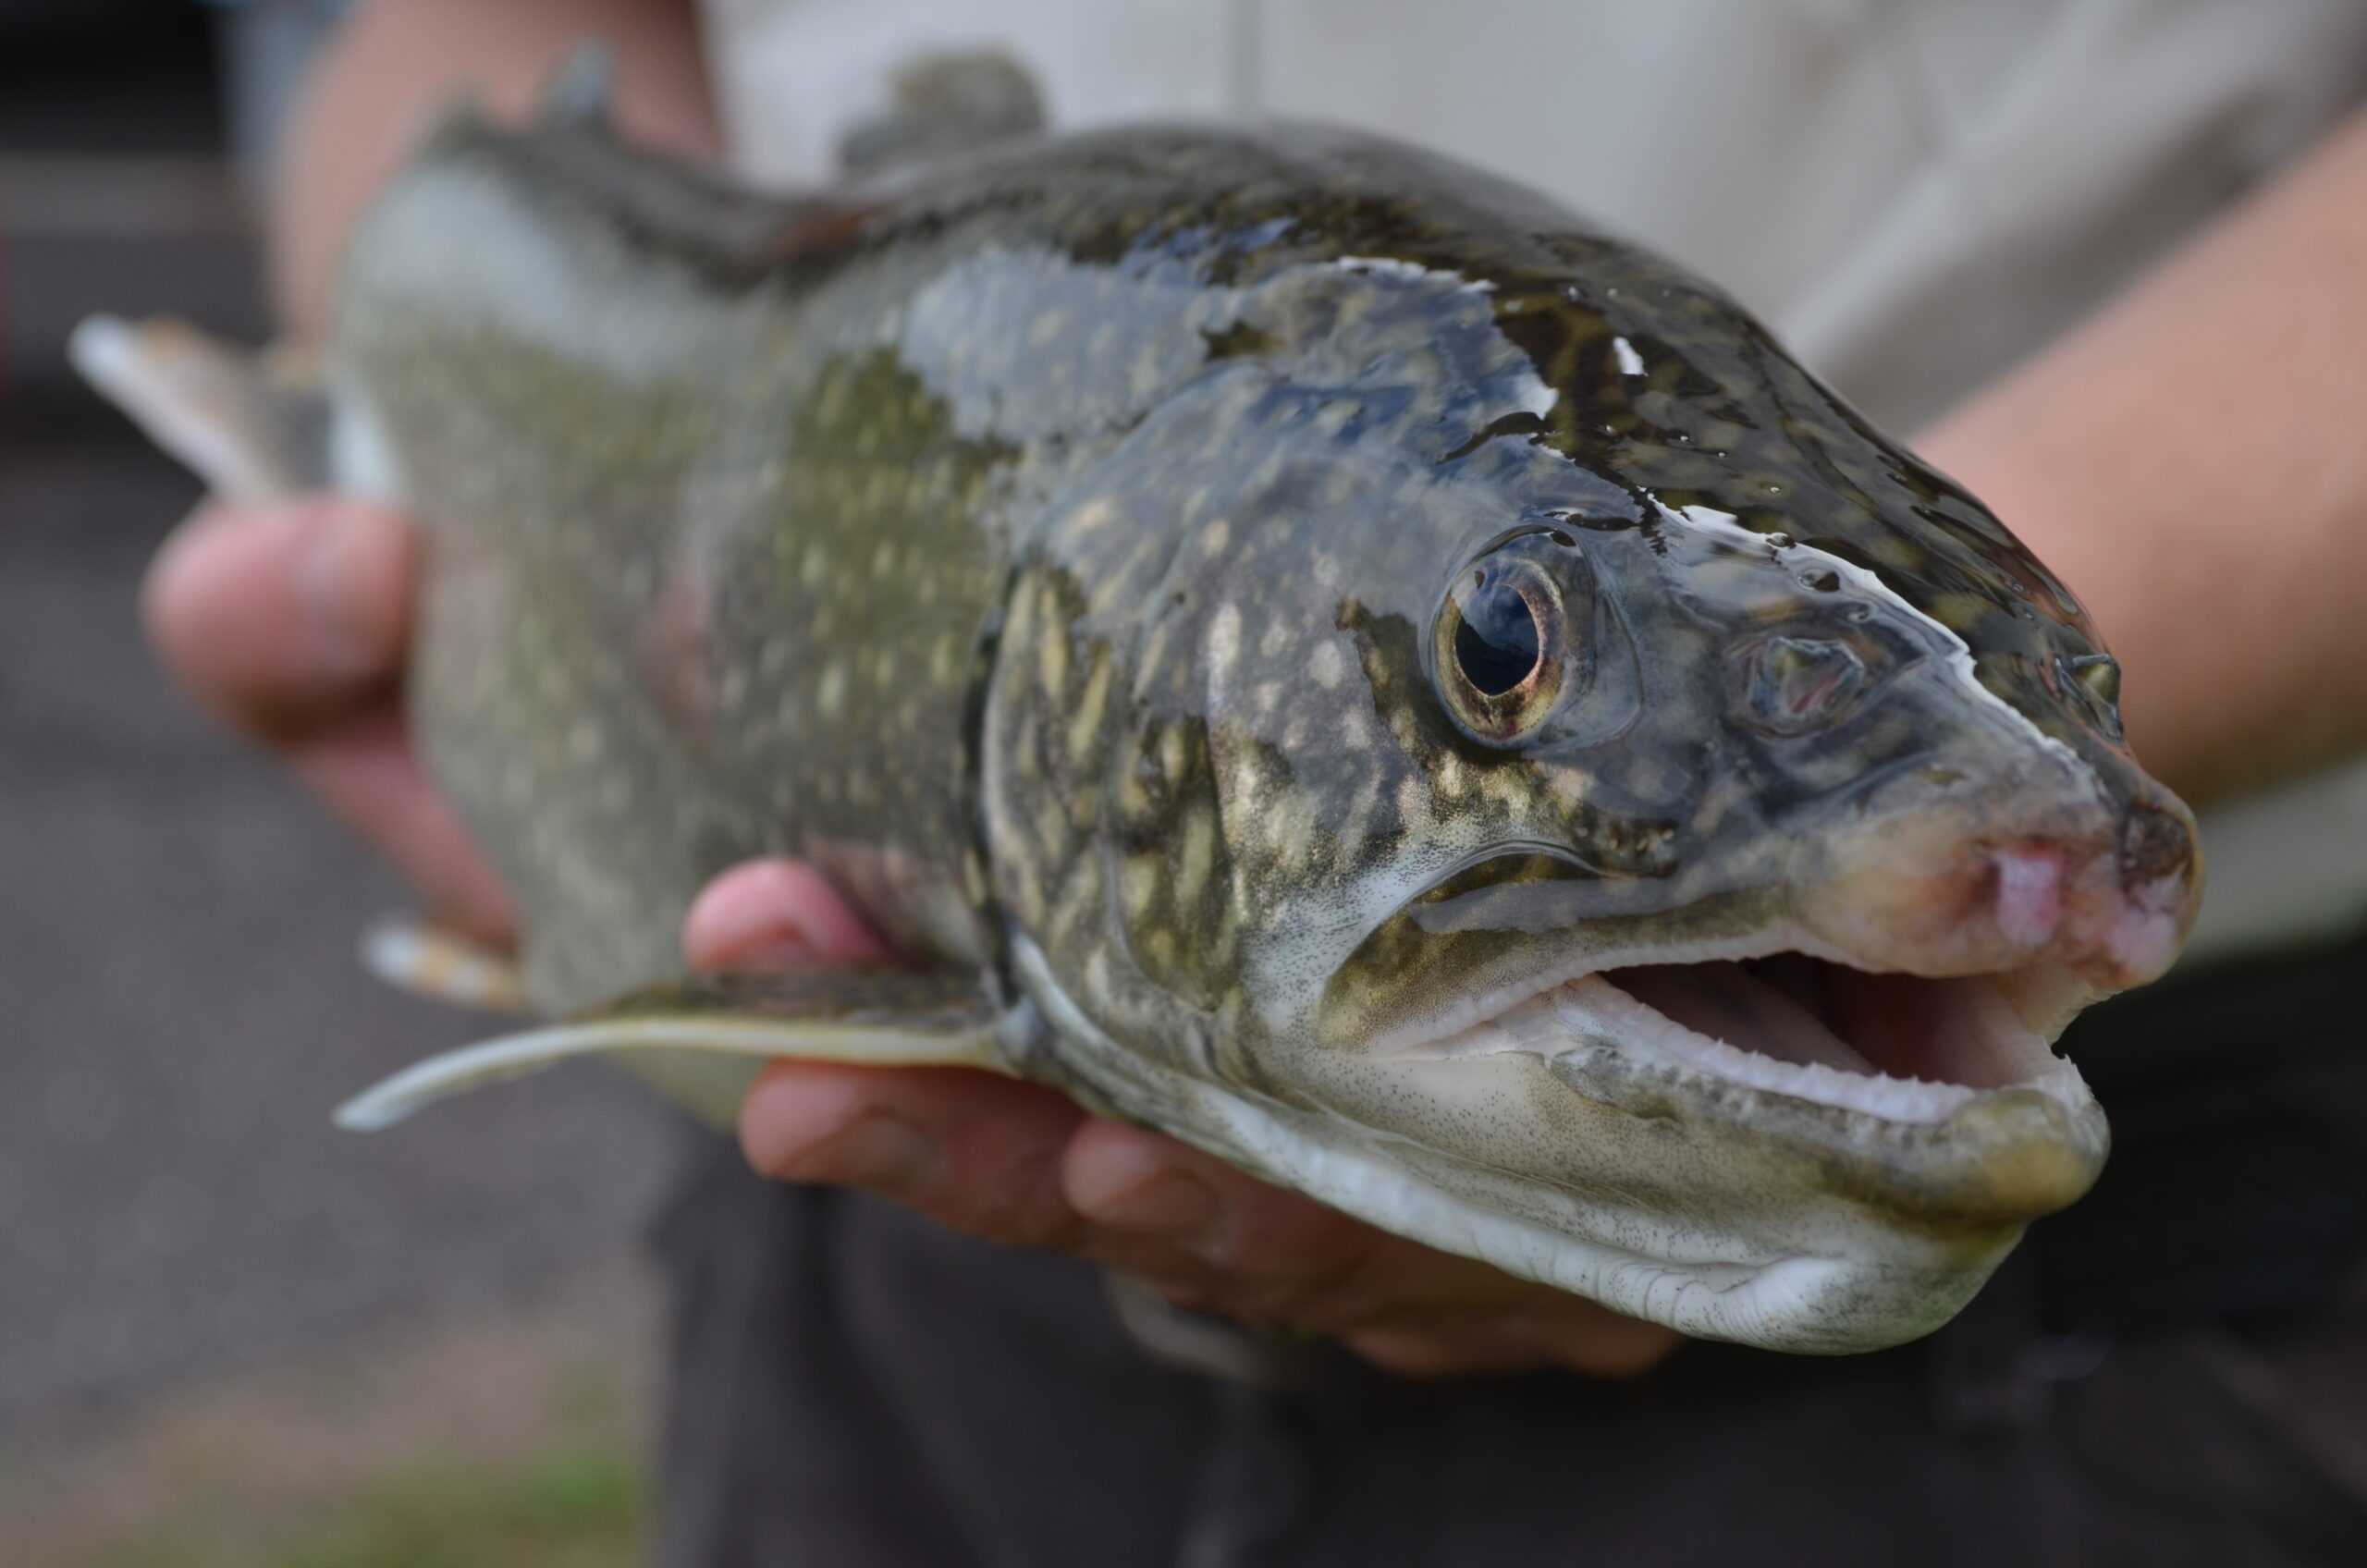 Adult lake trout restoration in the Great Lakes and other native range is important for the health of native fisheries.